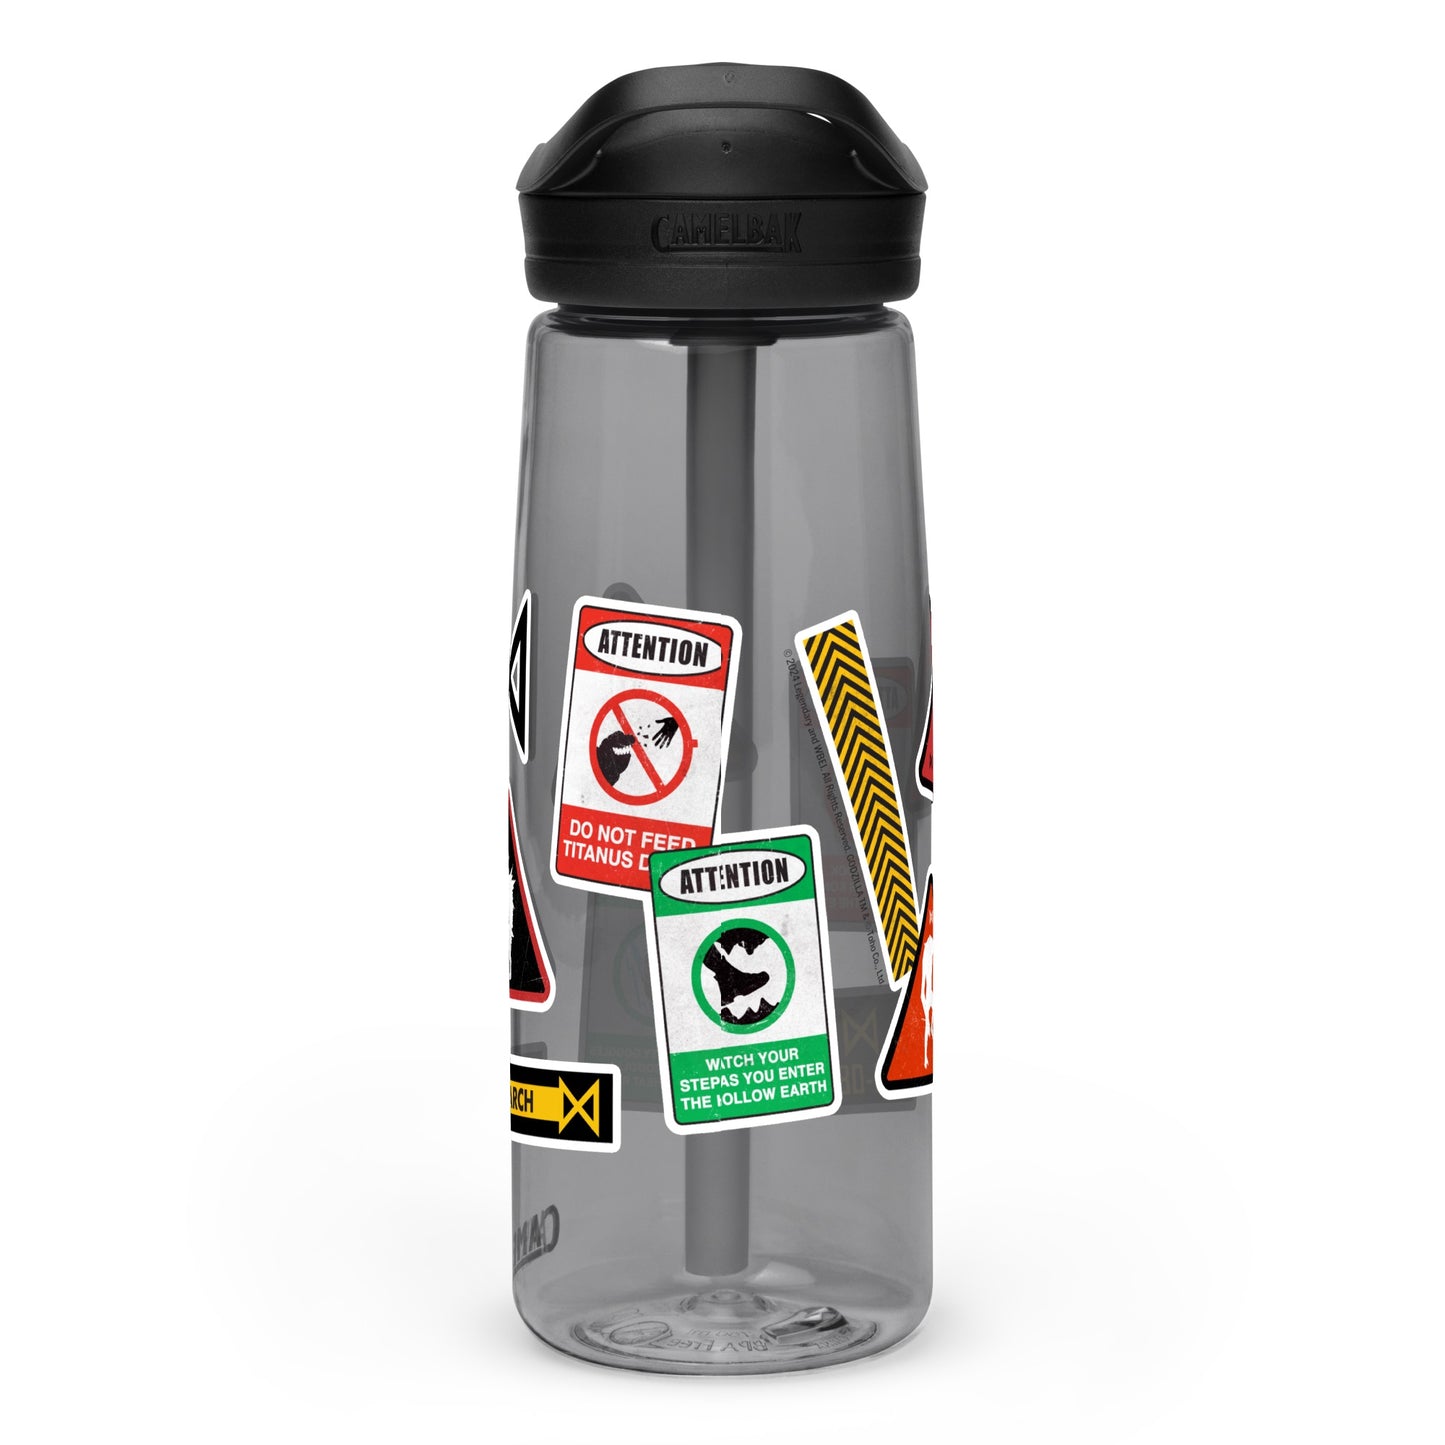 The New Empire Warning Signs Camelbak Water Bottle